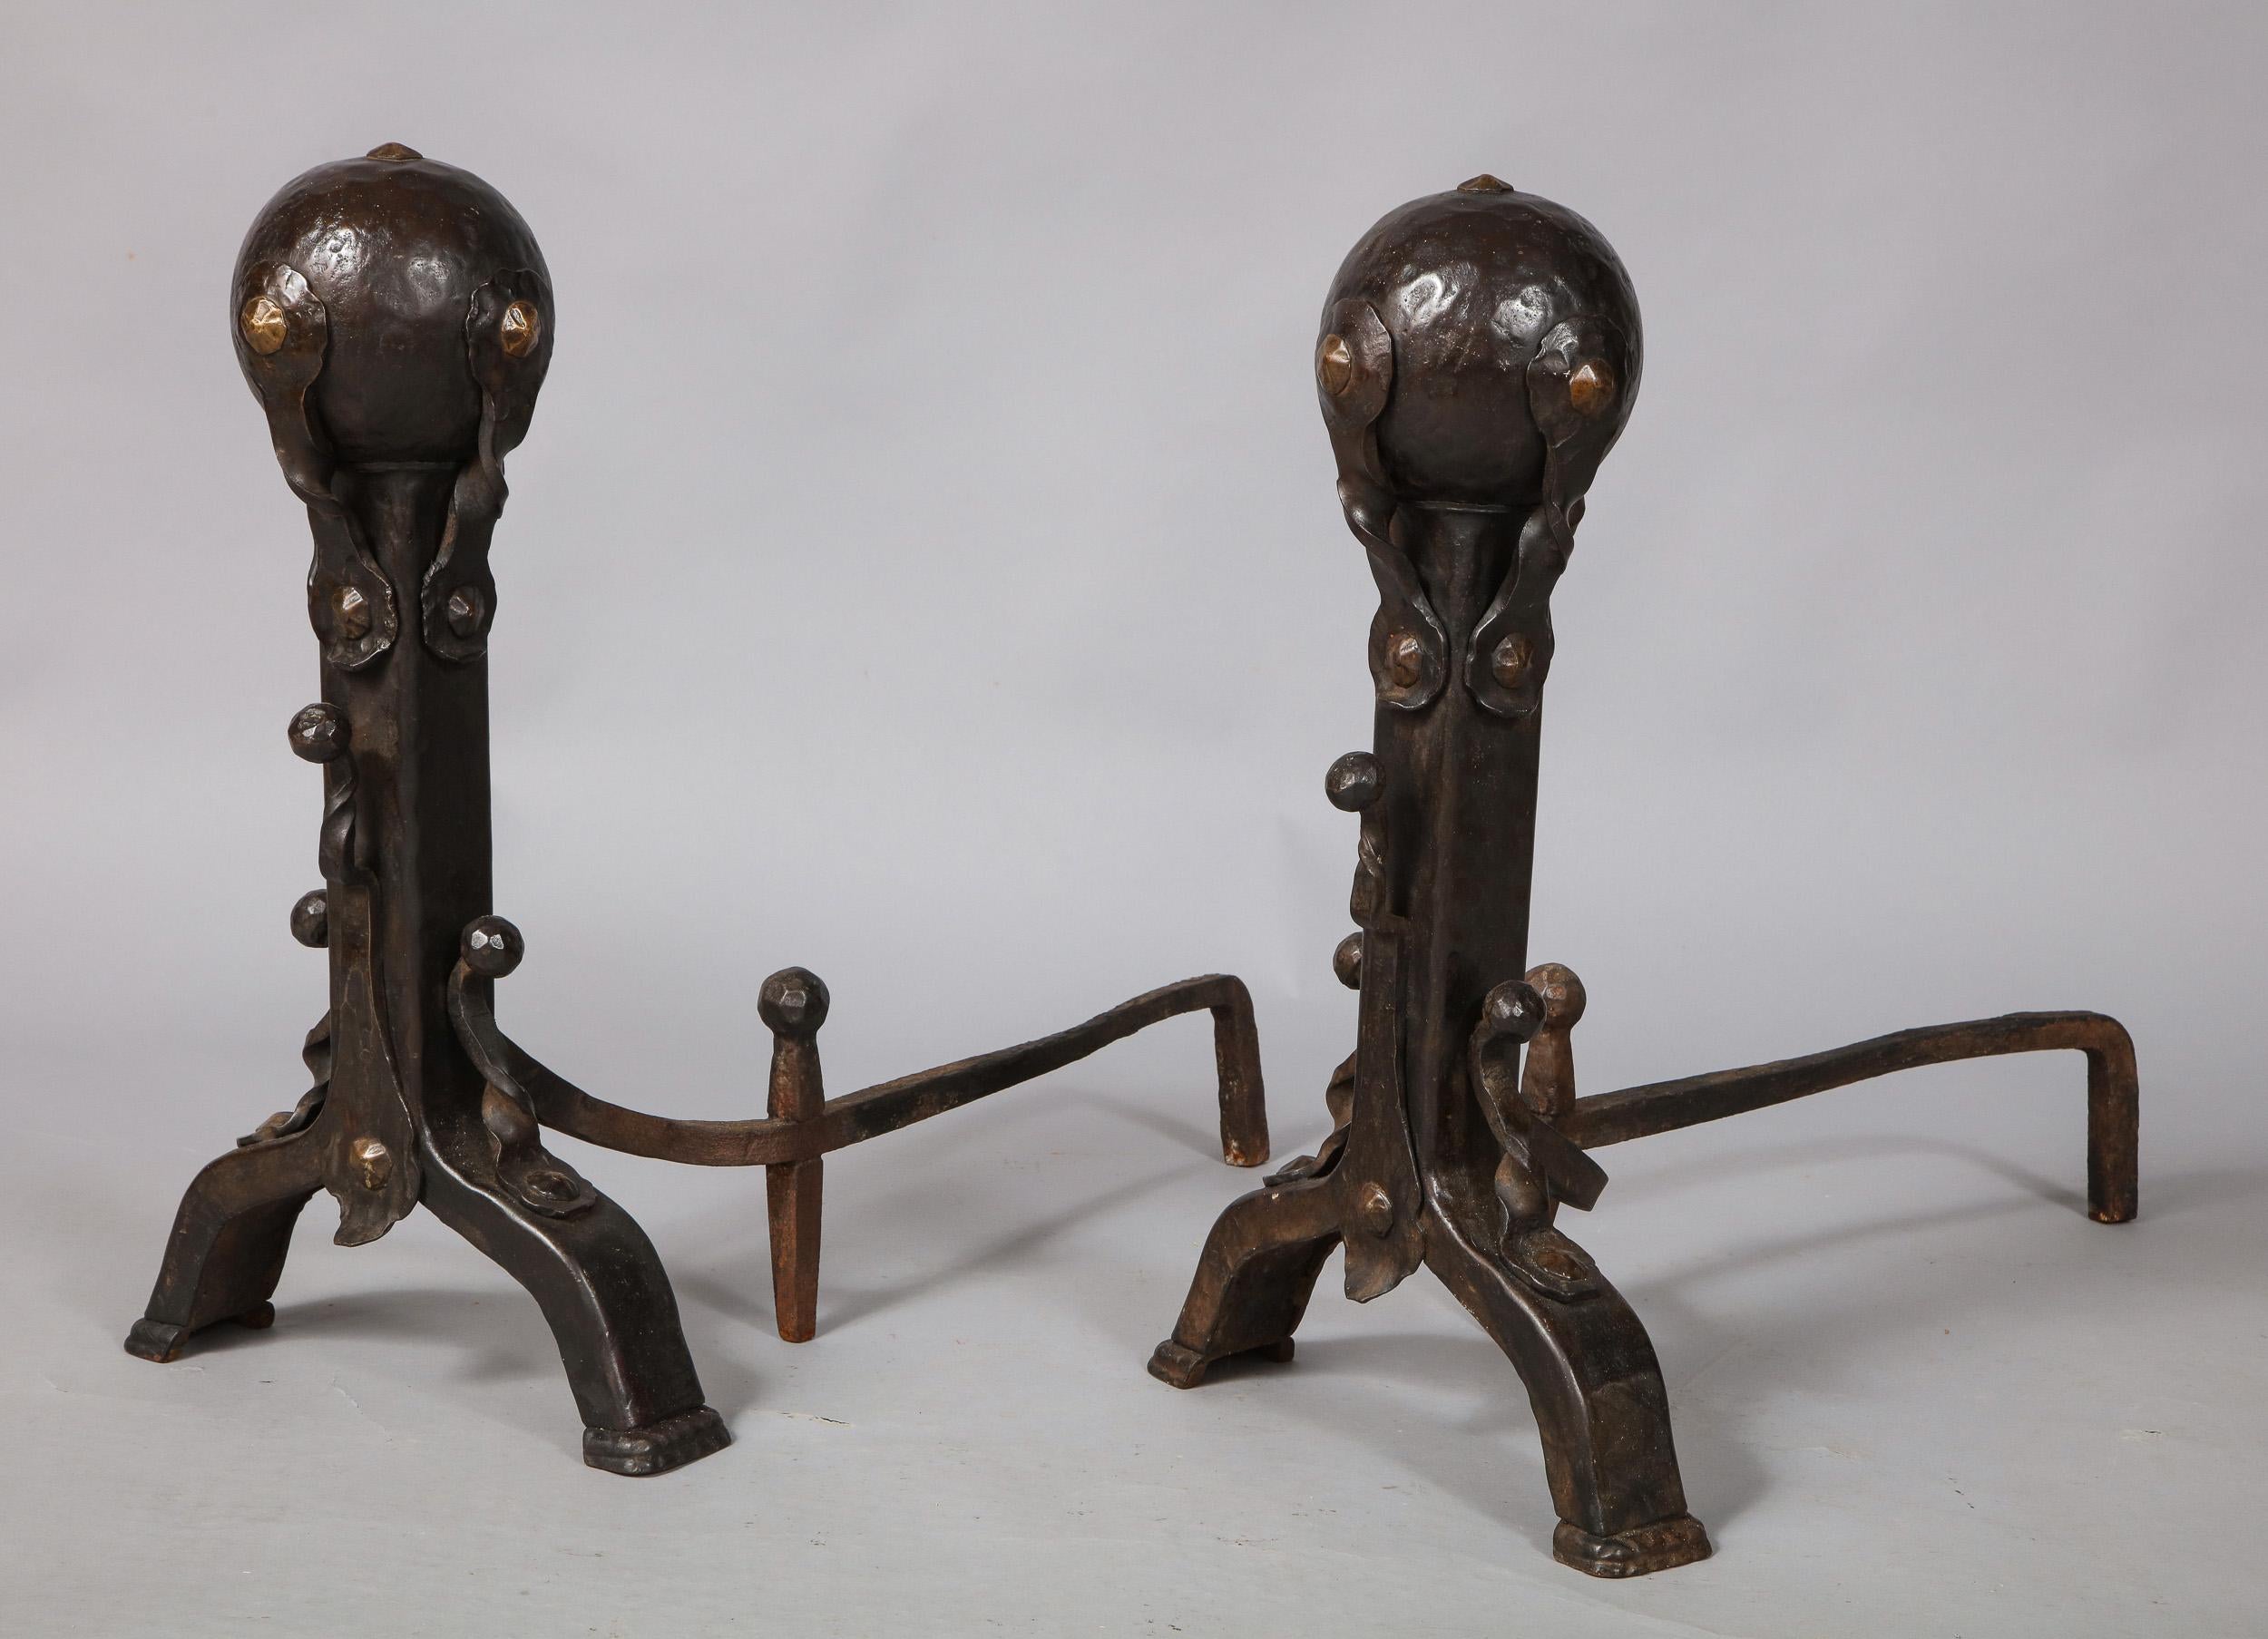 Fine pair of Arts & Crafts period patinated iron and bronze andirons, having two hammered sphere finials mounted with strapwork twists with beaten bronze rivets over similarly mounted shafts and standing on arched feet.